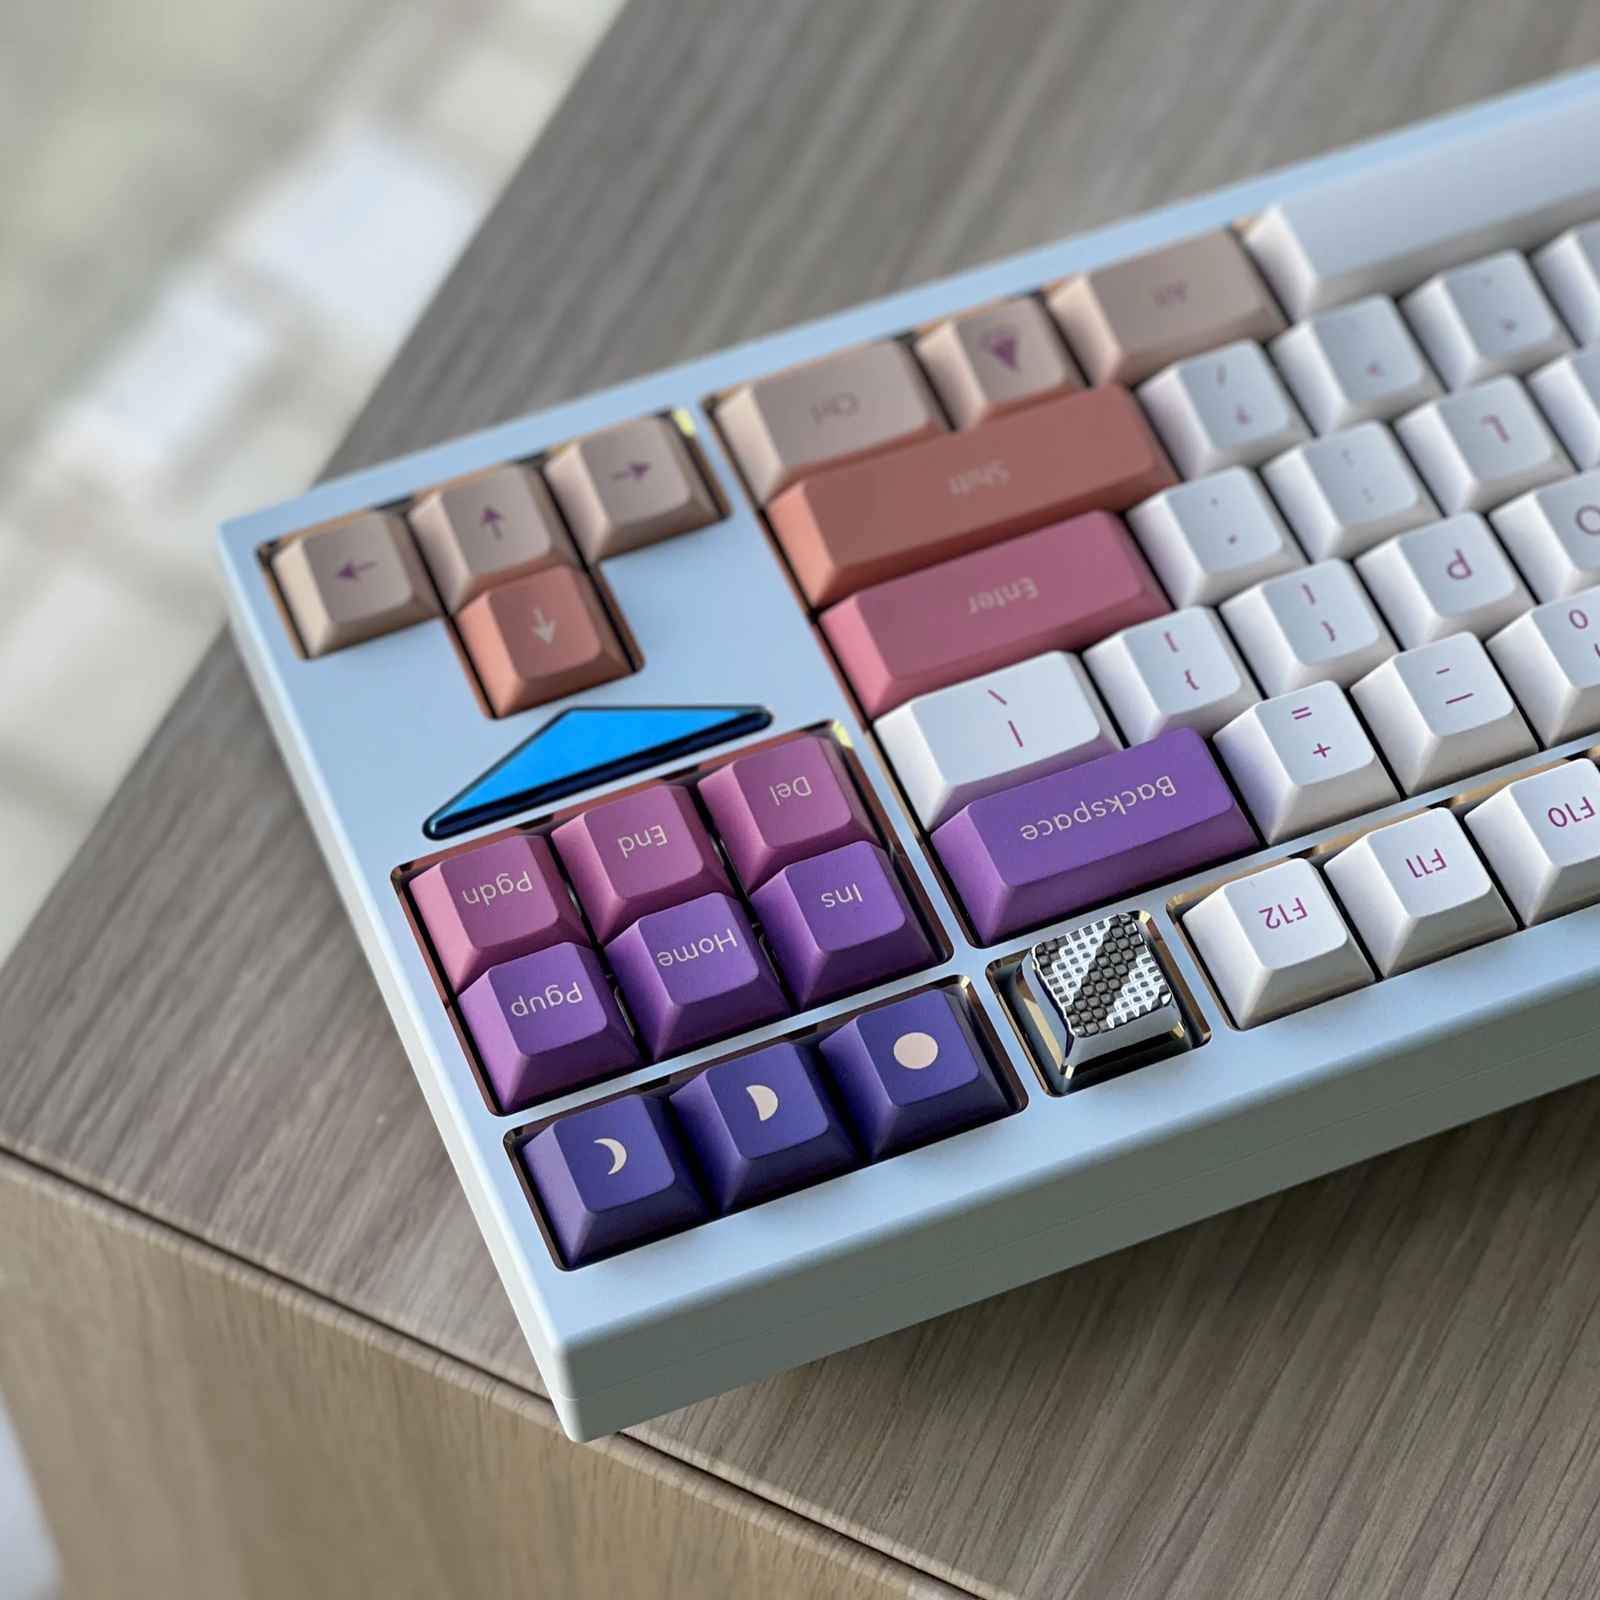 [In Stock] Carmine Cloud PBT Cherry Keycaps Set (Free Shipping To Some Countries)